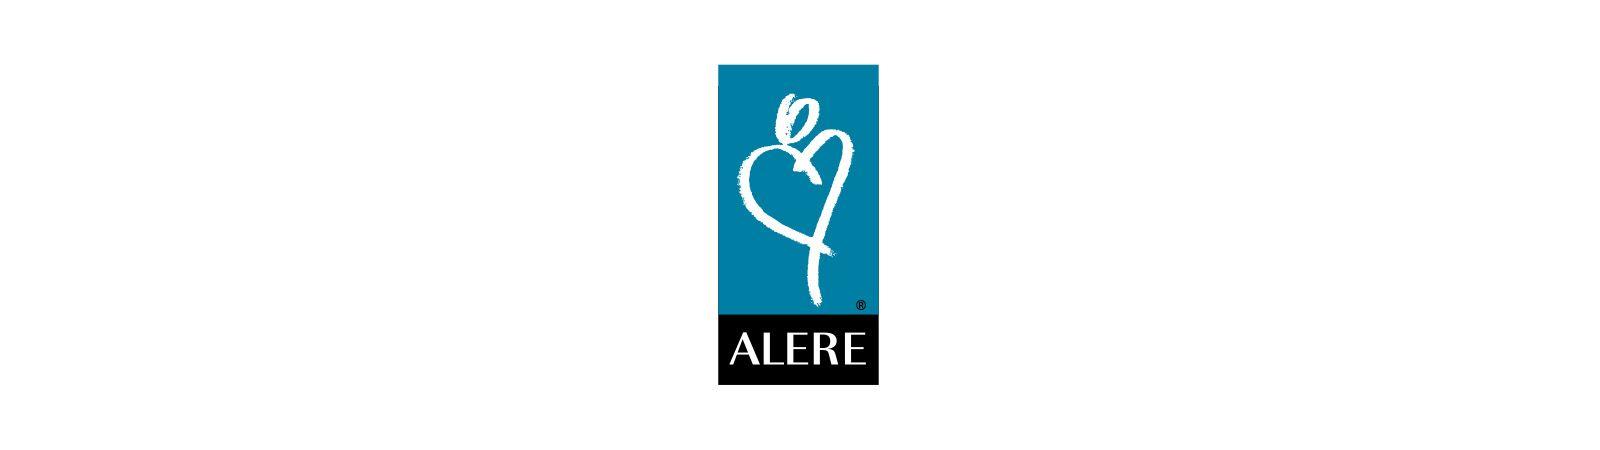 Alere Logo - Alere Medical. Healthcare Sector. TA. A Private Equity Firm